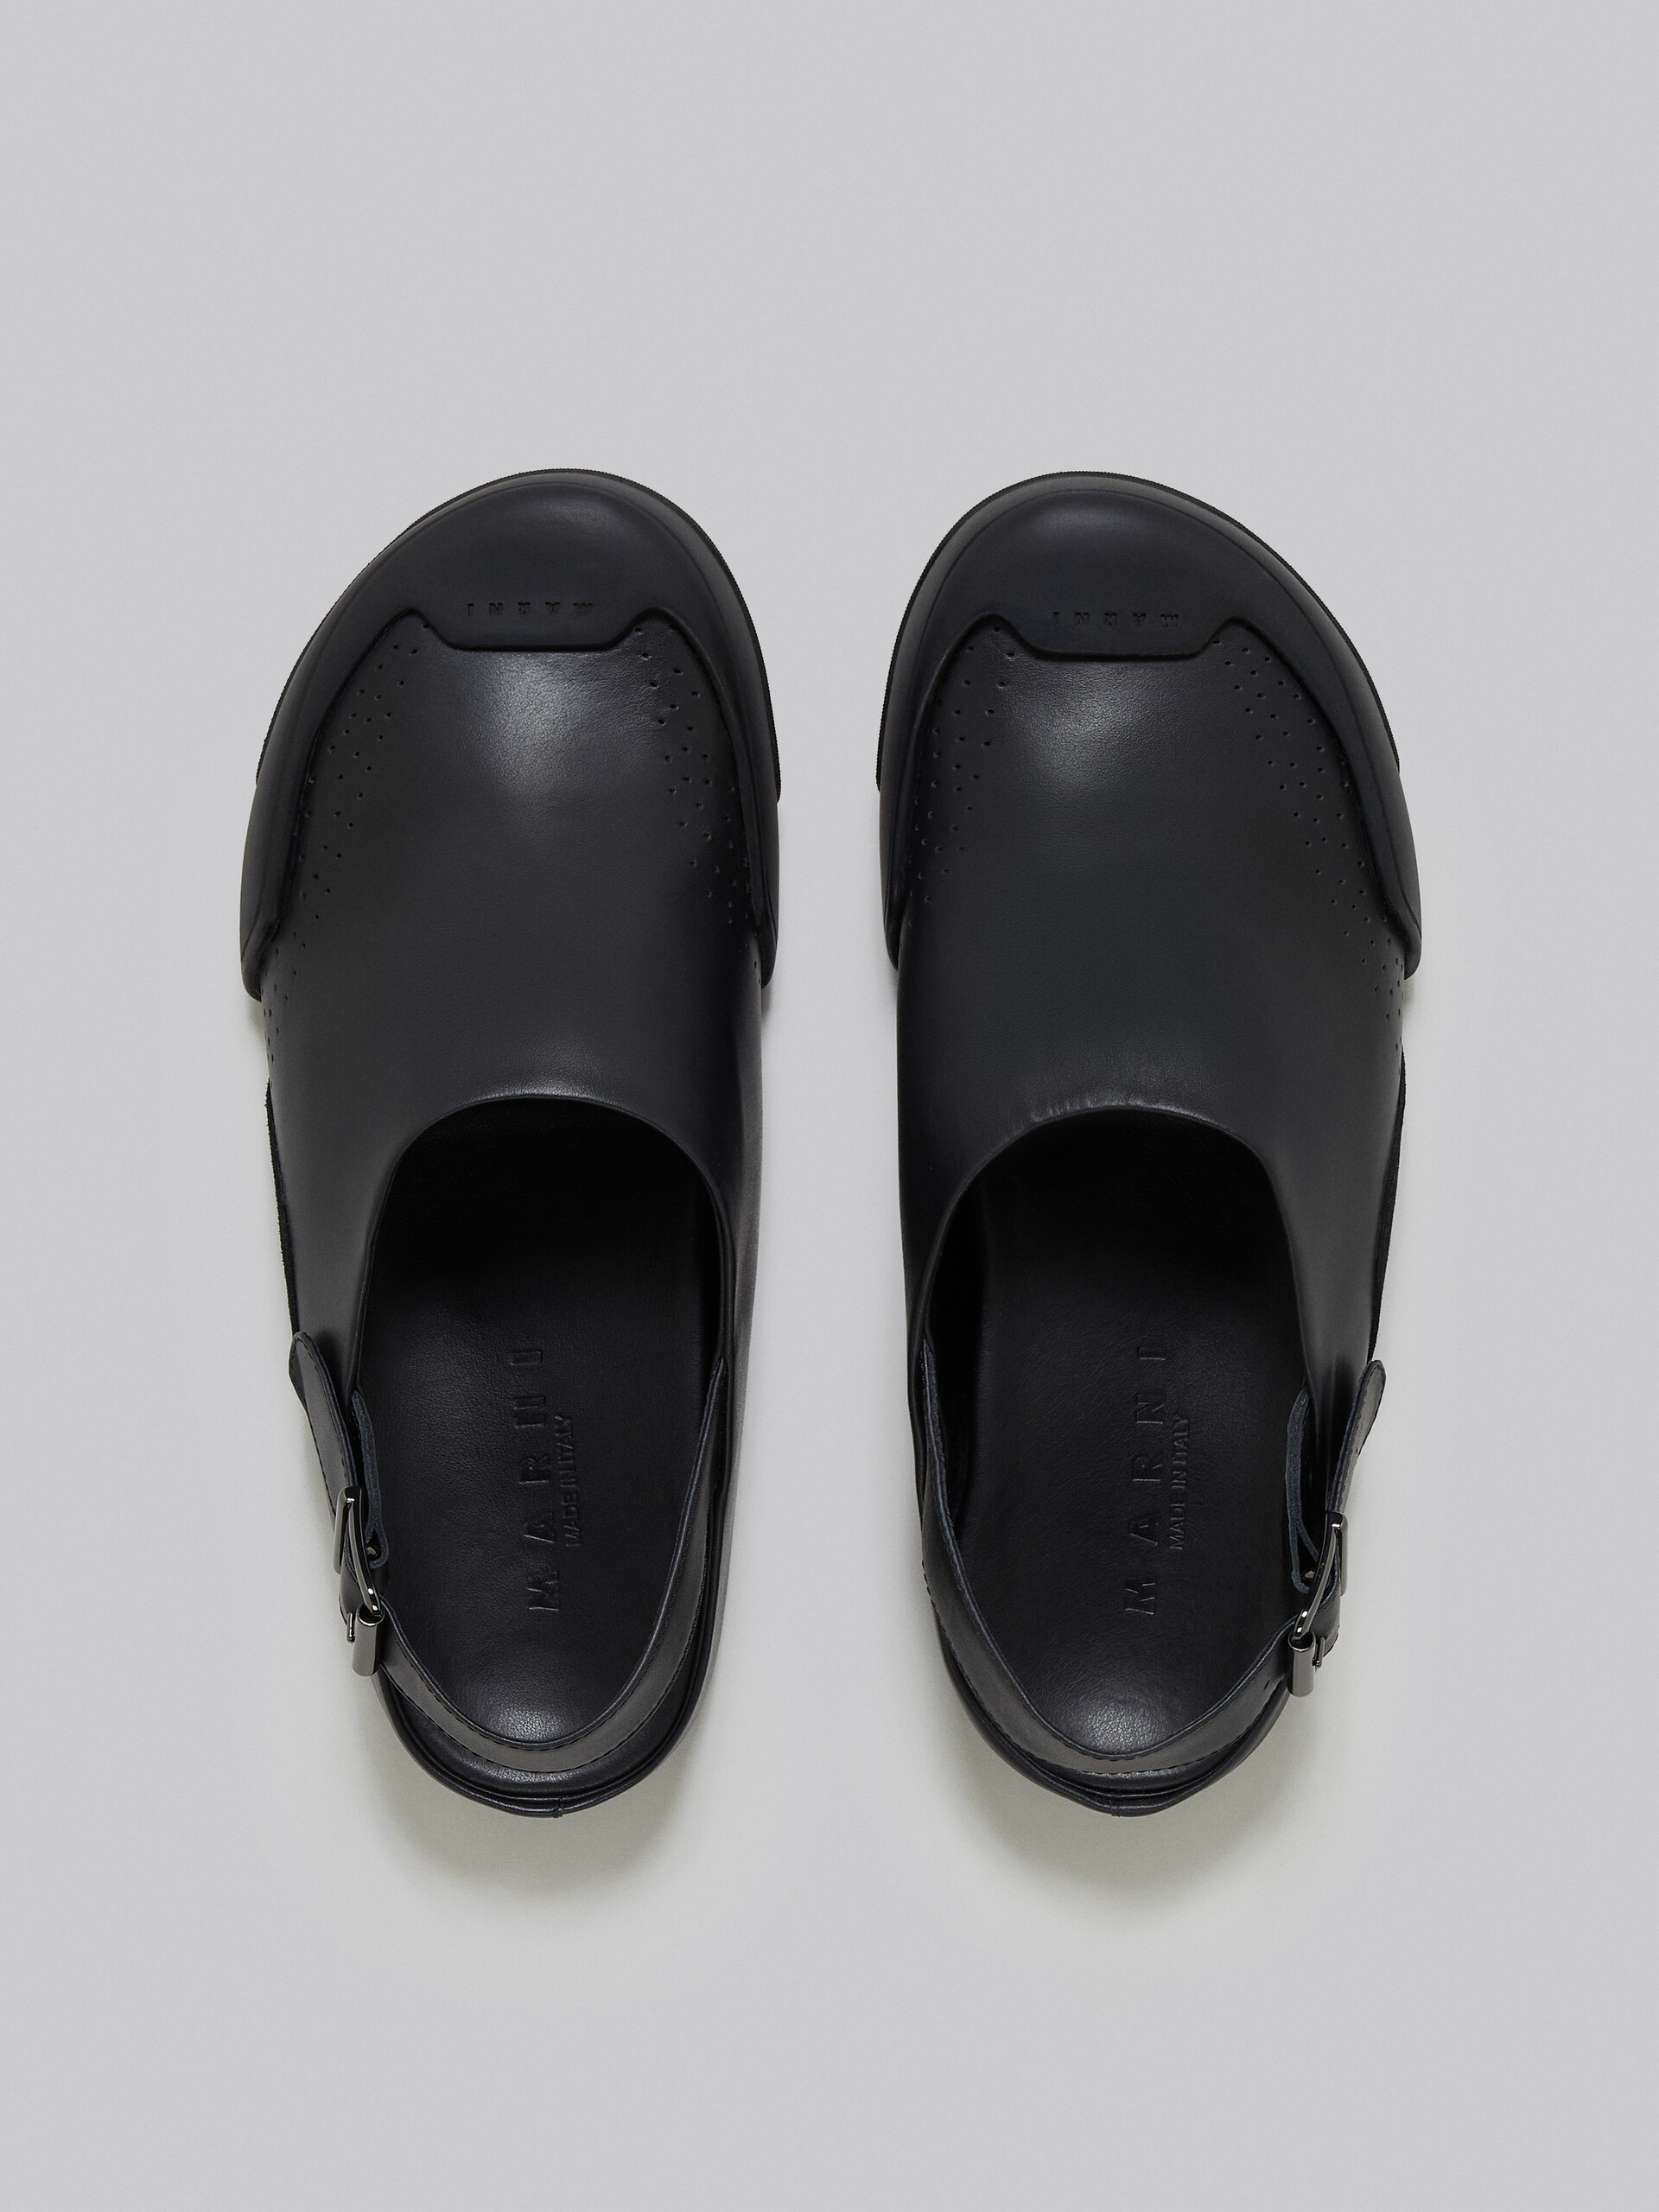 Black leather and suede Dada Sabot - Clogs - Image 4